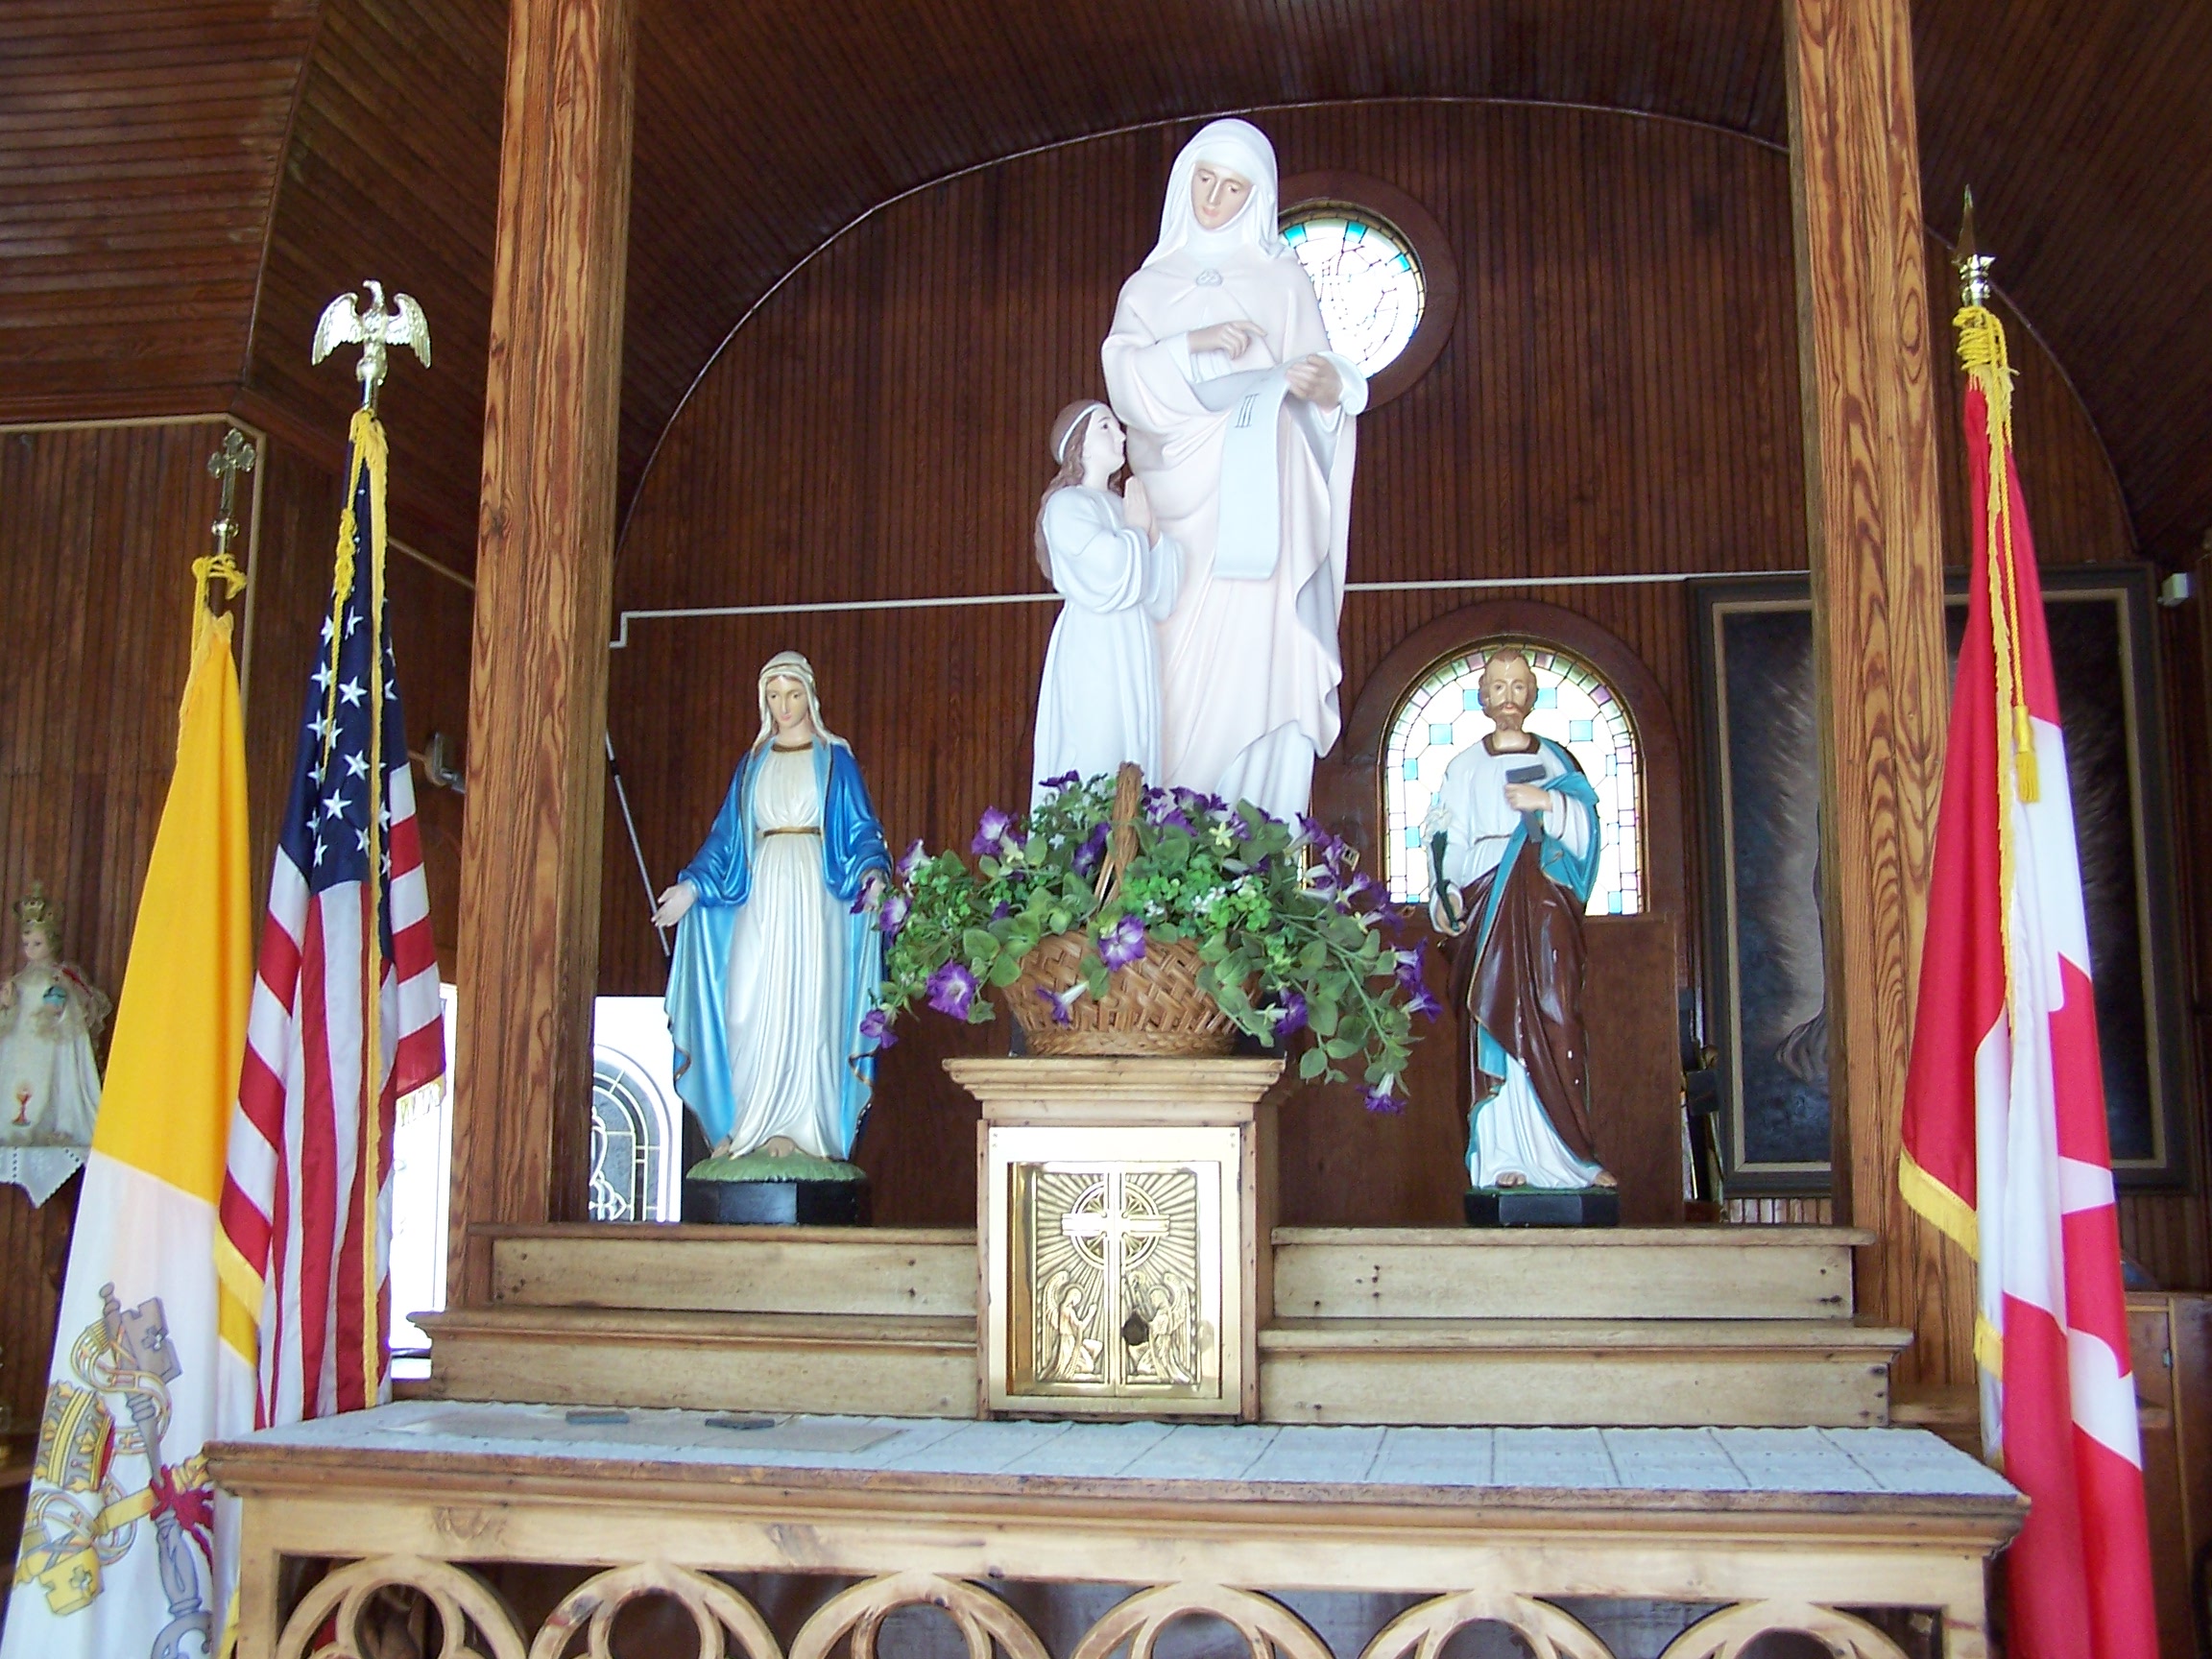 Saint Anne's Shrine is located on Isle LaMotte, a quiet island on Lake Champlain in Vermont. It was developed by the Society of Saint Edmund and has been maintained by them for 100 years..